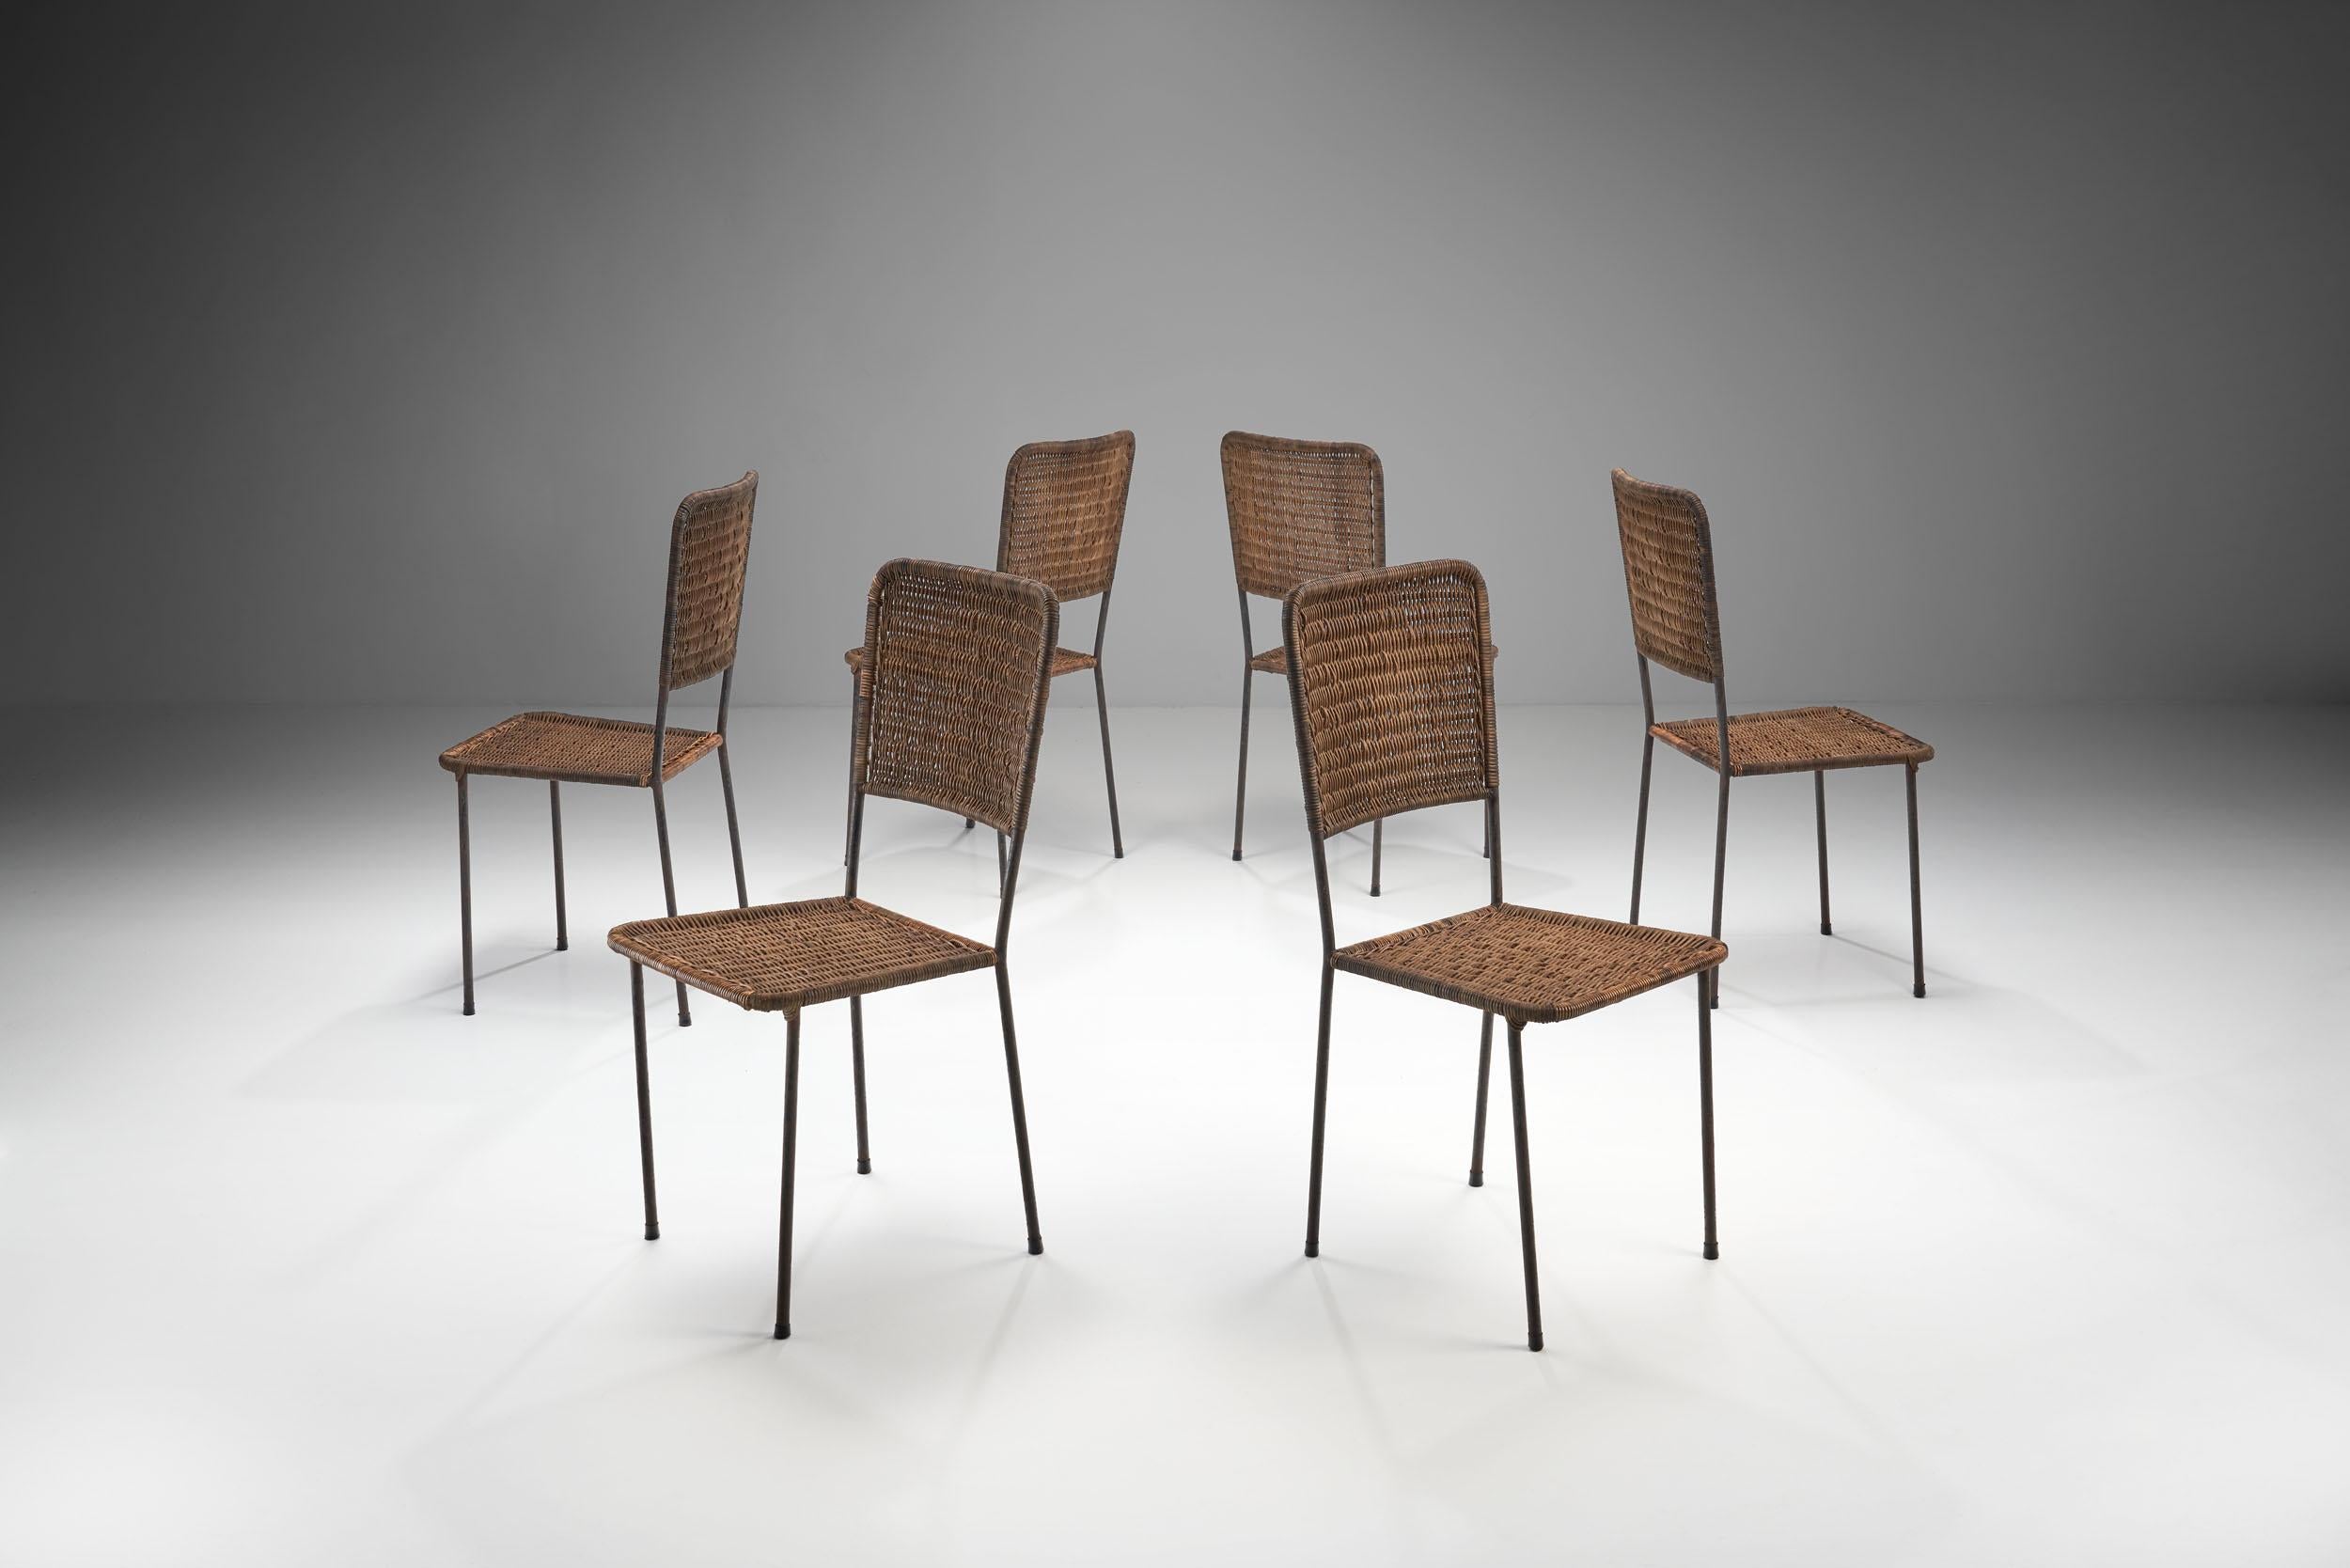 Mid-20th Century 6 Iron and Rattan Chairs, Brazil, 1960s For Sale